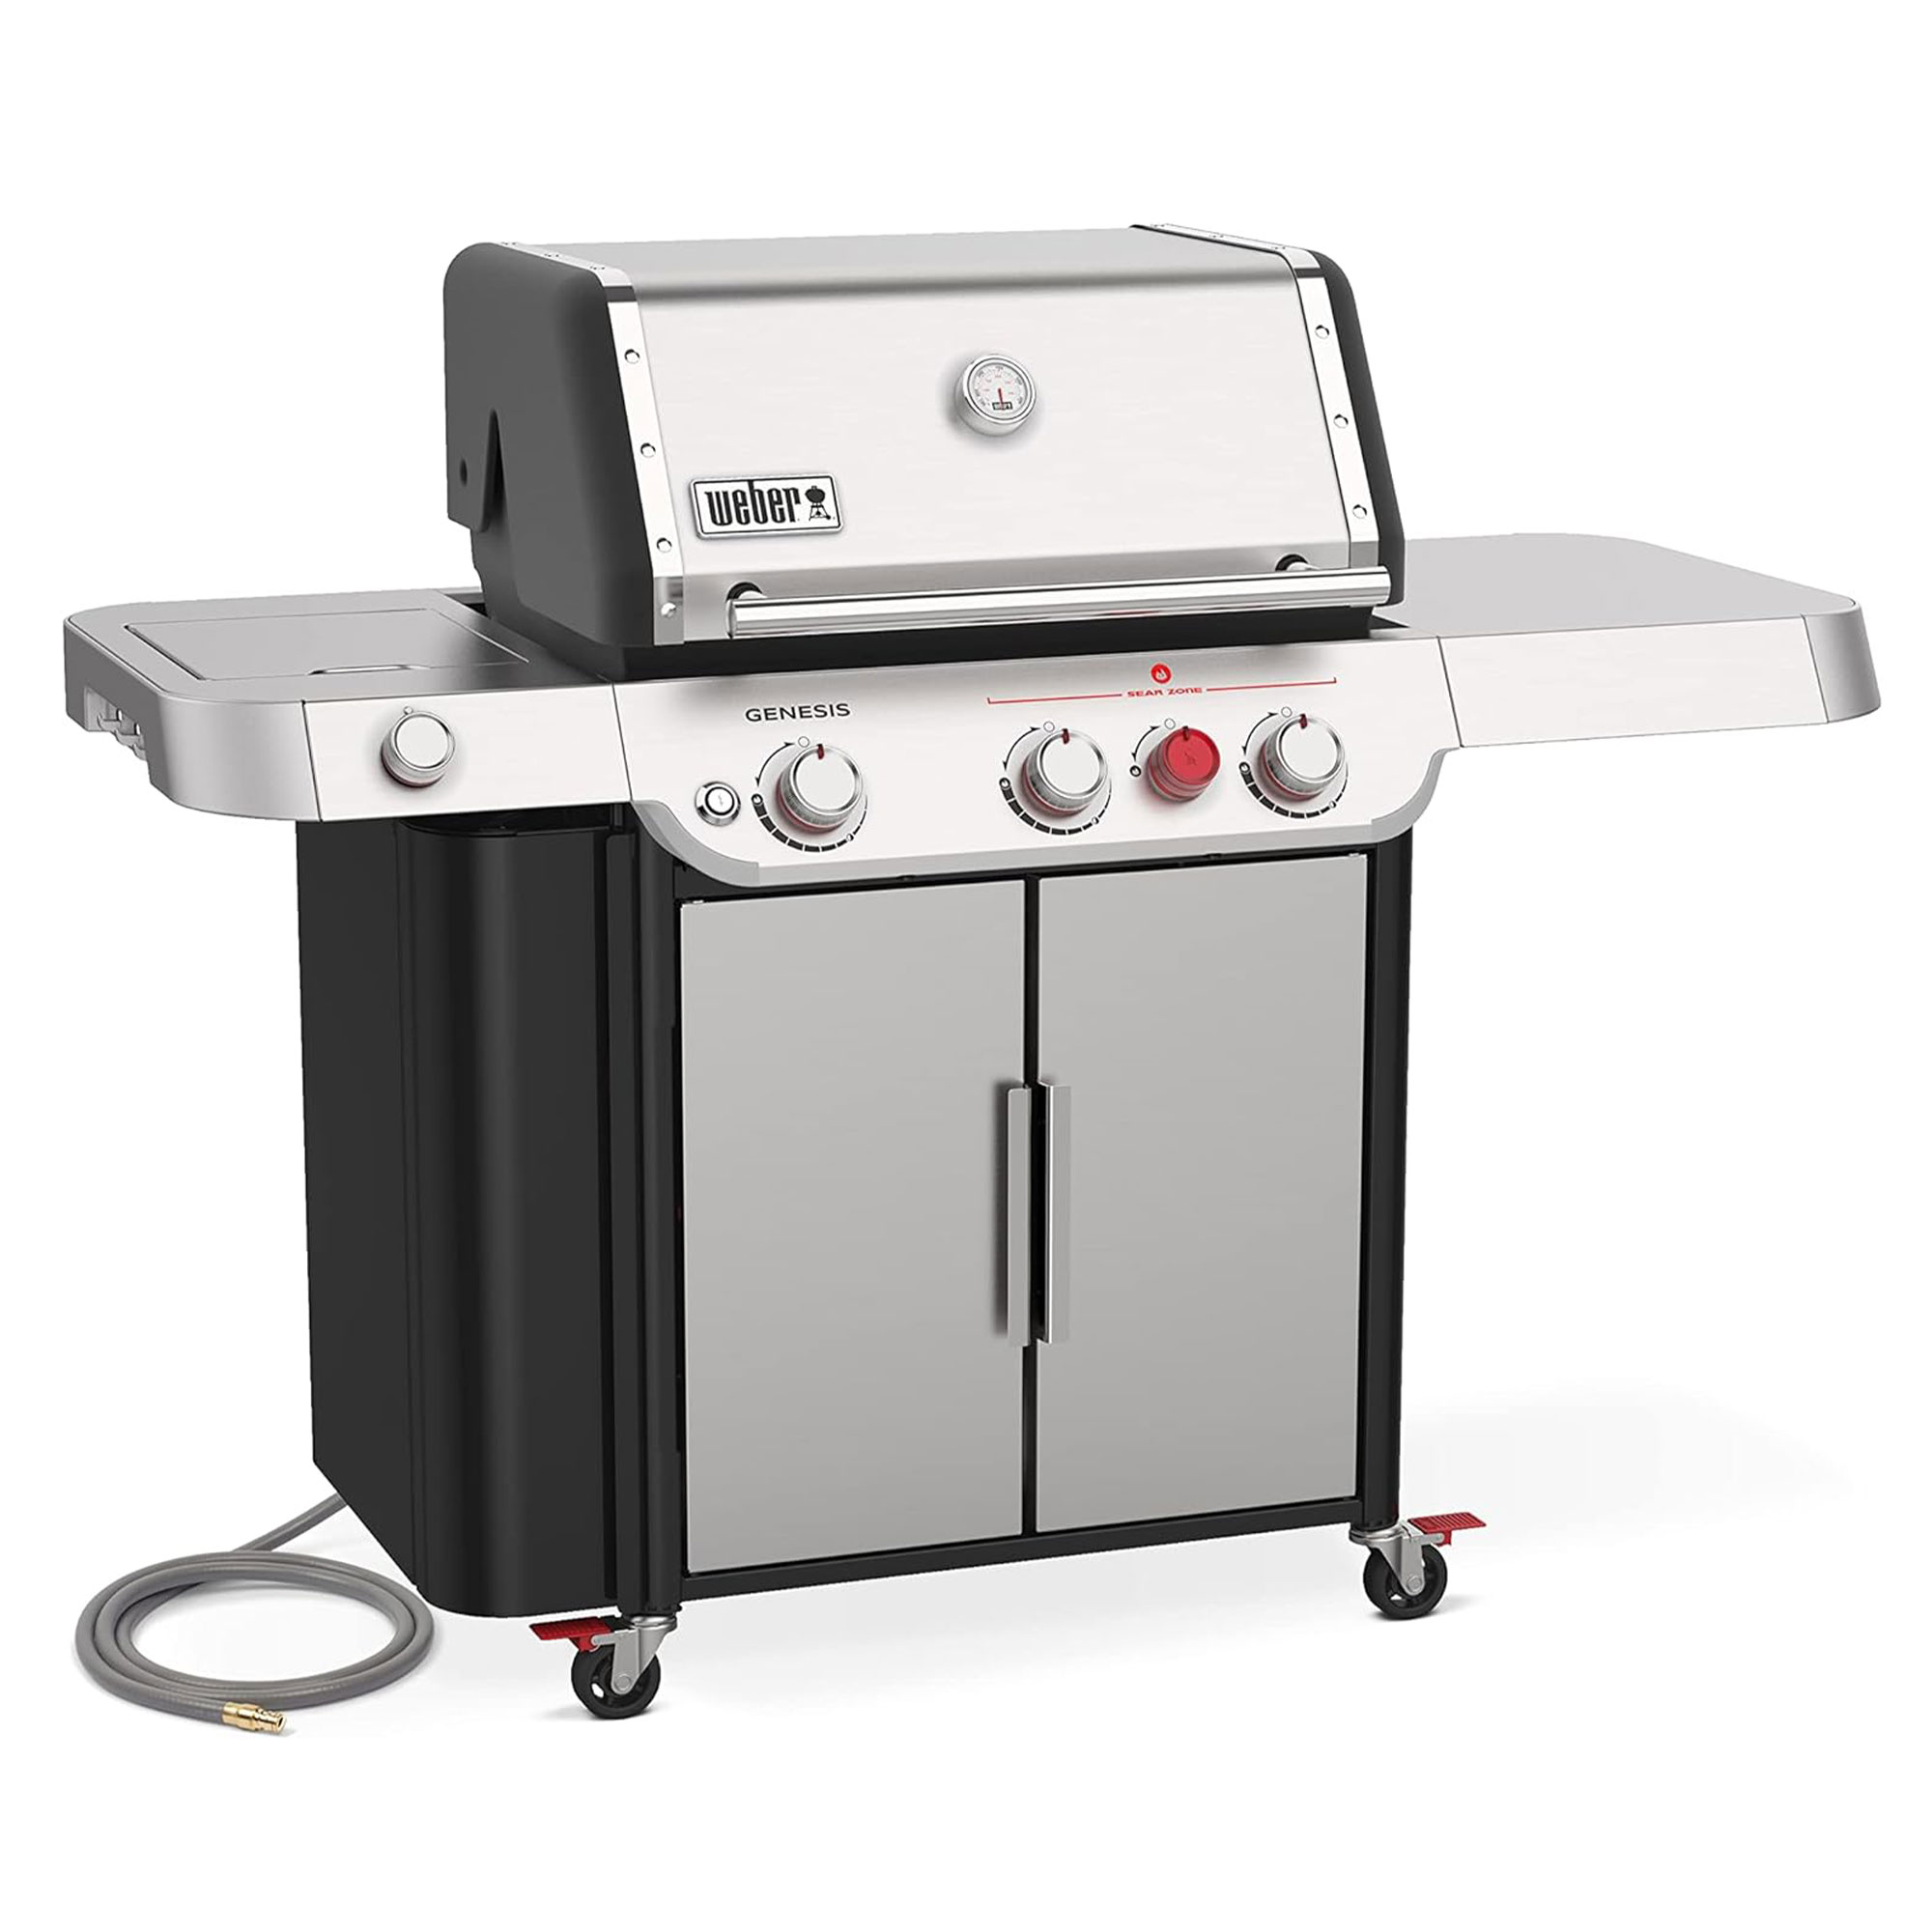 Weber Genesis S-335 Stainless Steel 3 Burner Natural Gas Grill, Silver - image 1 of 9